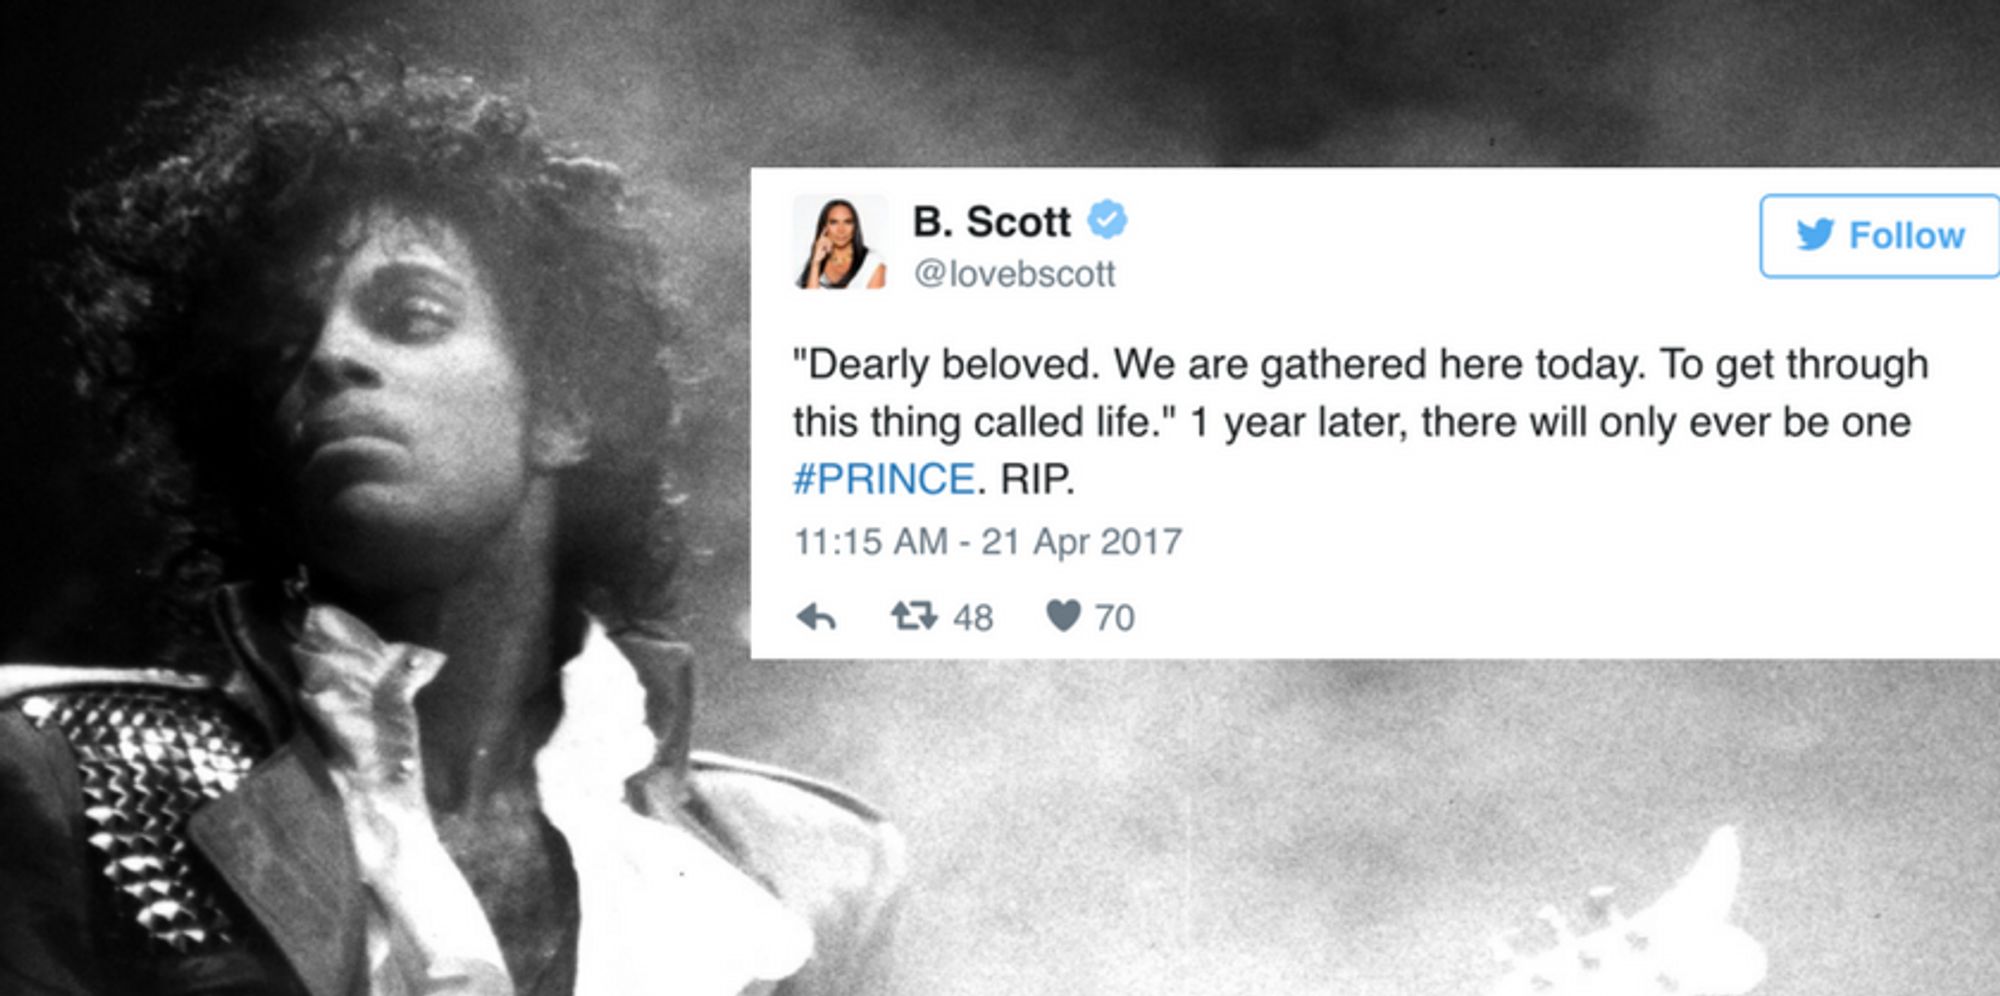 Prince's Fans Remember Him On Social Media On Anniversary Of His Death - Huffington Post